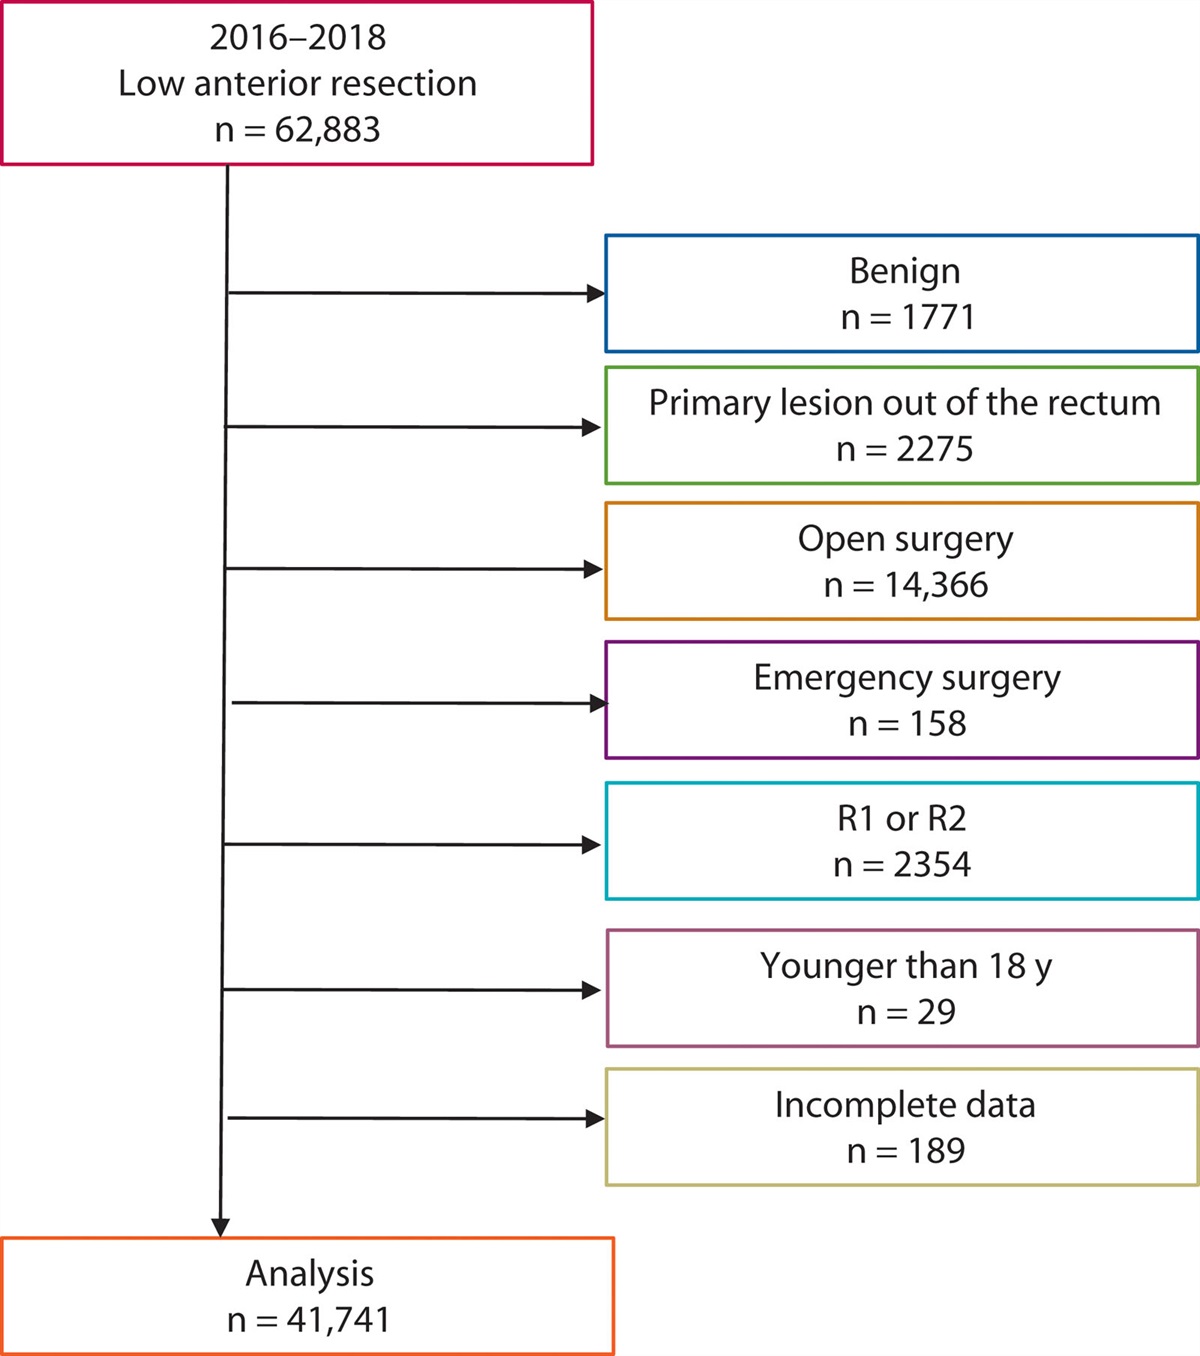 Specialty-Certified Colorectal Surgeons Demonstrate Favorable Short-term Surgical Outcomes for Laparoscopic Low Anterior Resection: Assessment of a Japanese Nationwide Database